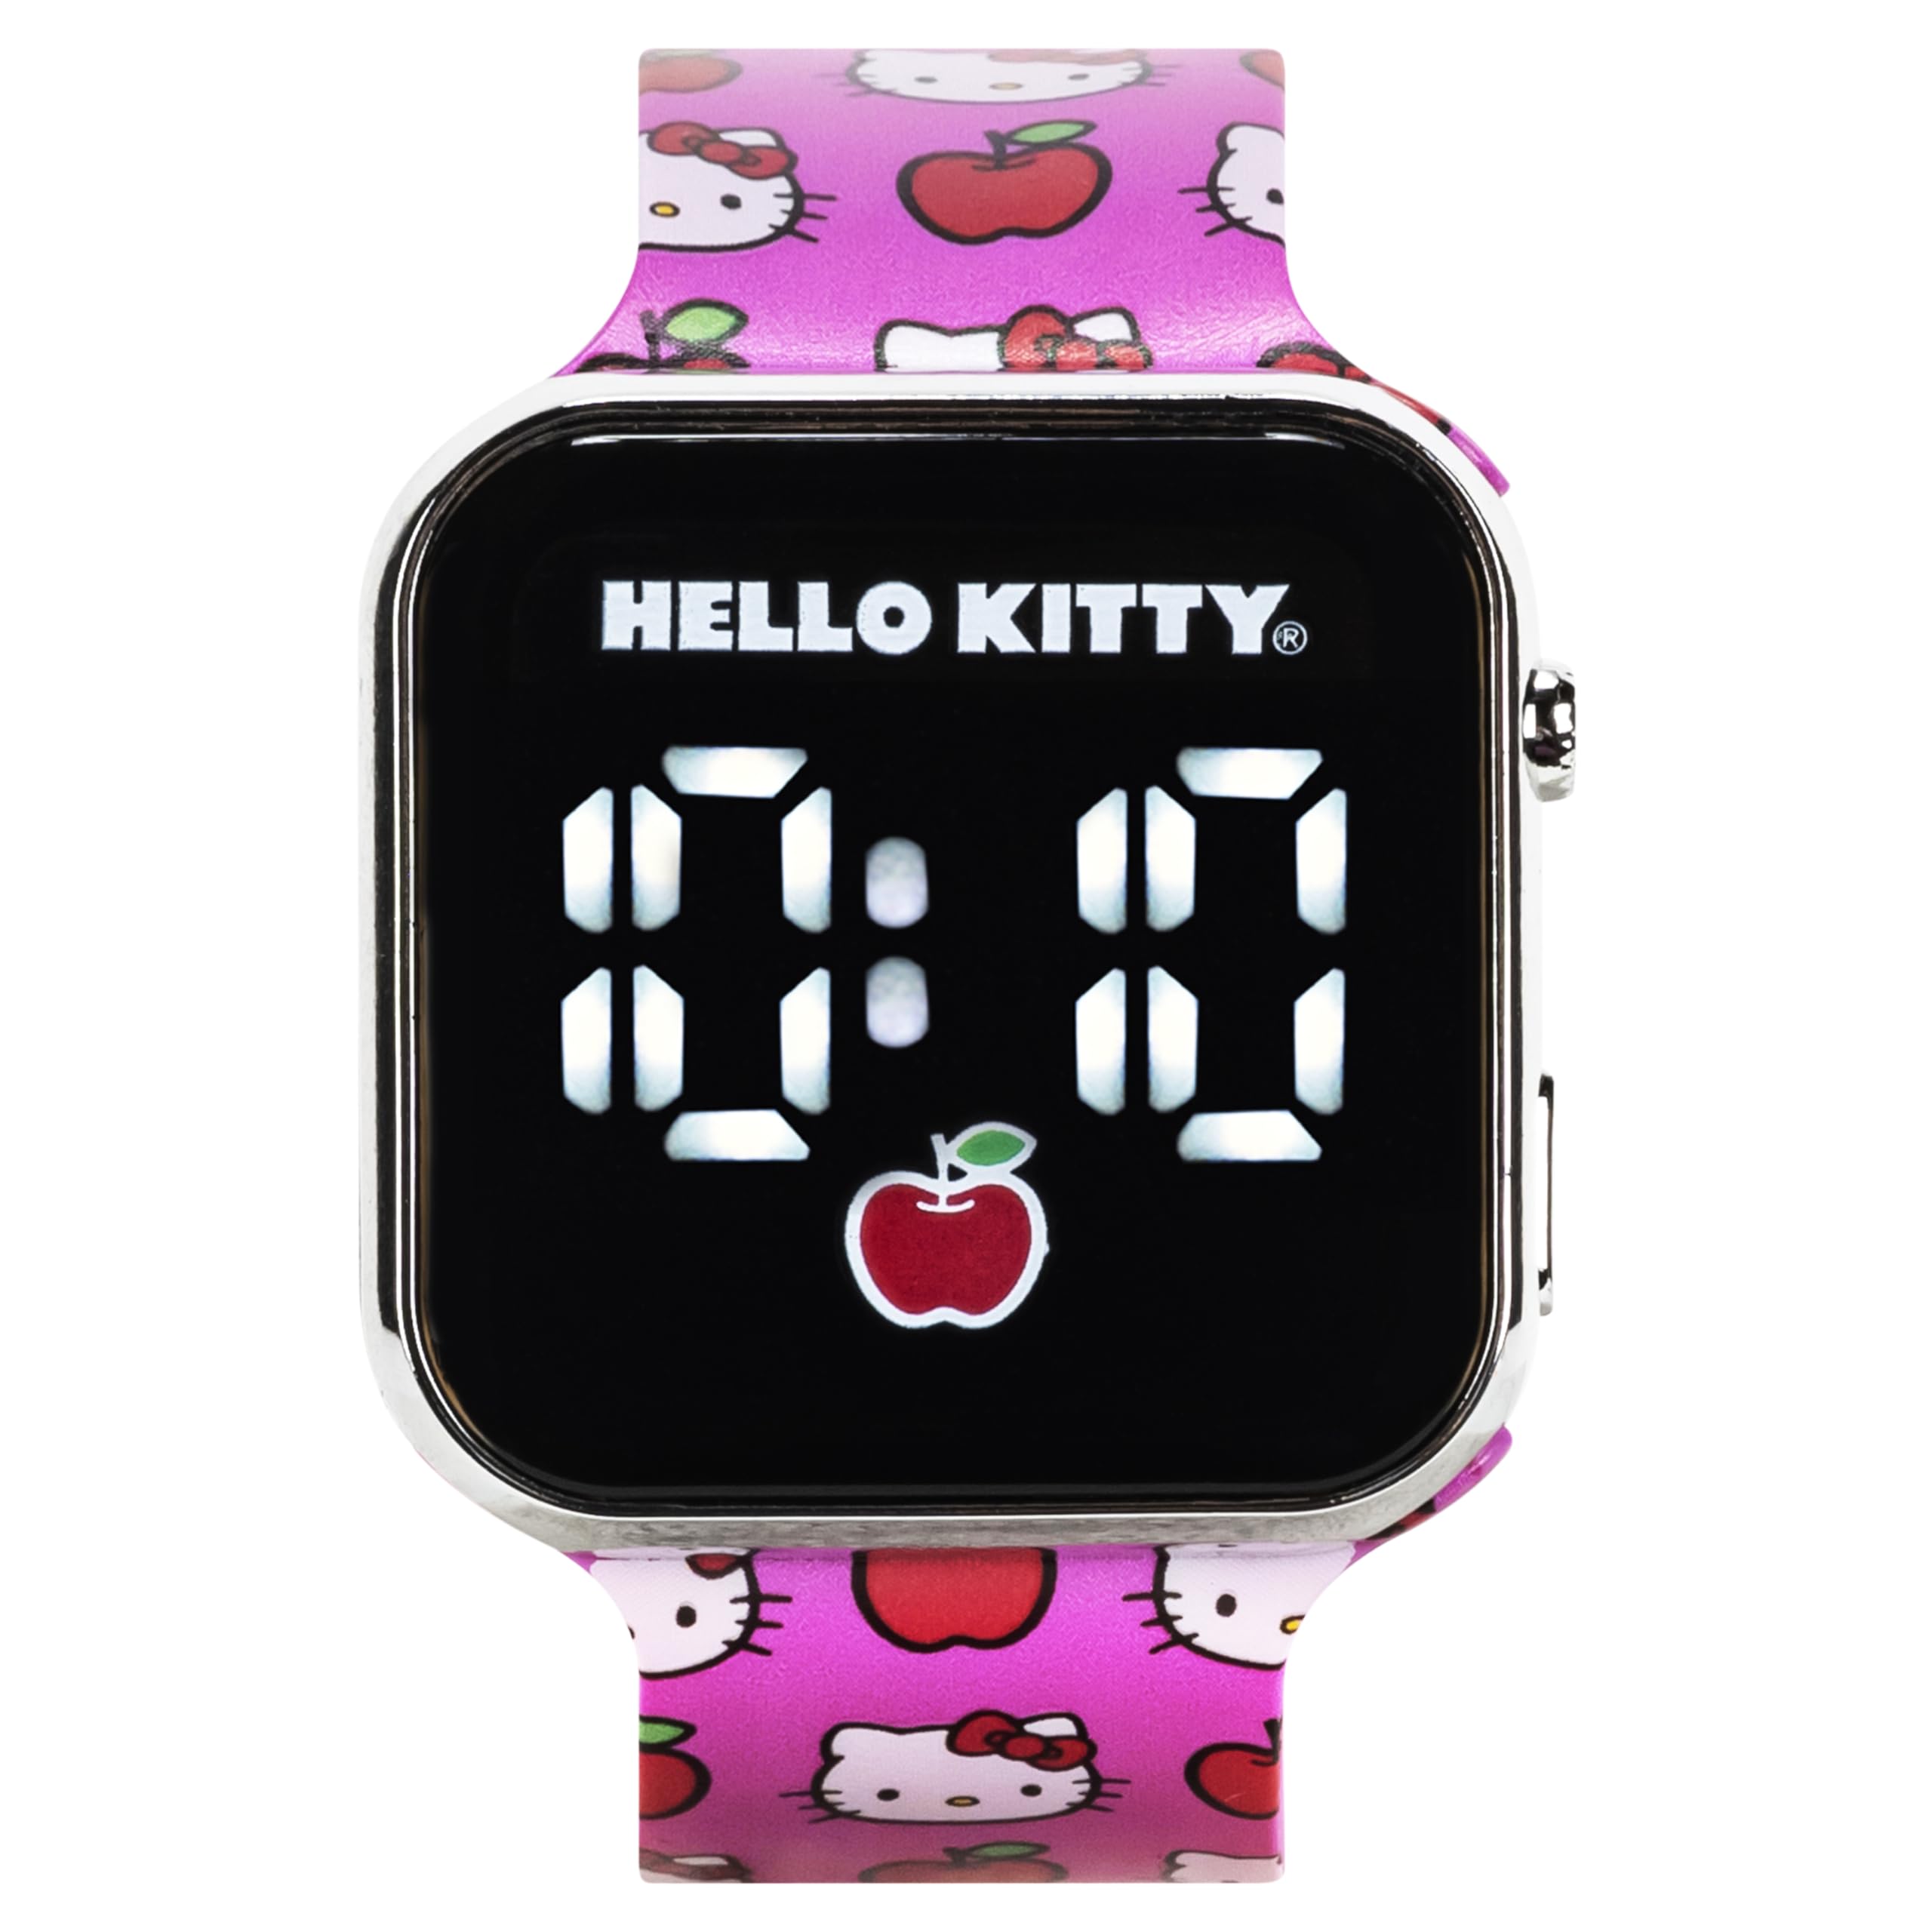 Accutime Hello Kitty Digital LED Quartz Kids Pink Watch for Girls with White Hello Kitty and Friends Band Strap (Model: HK4222AZ)